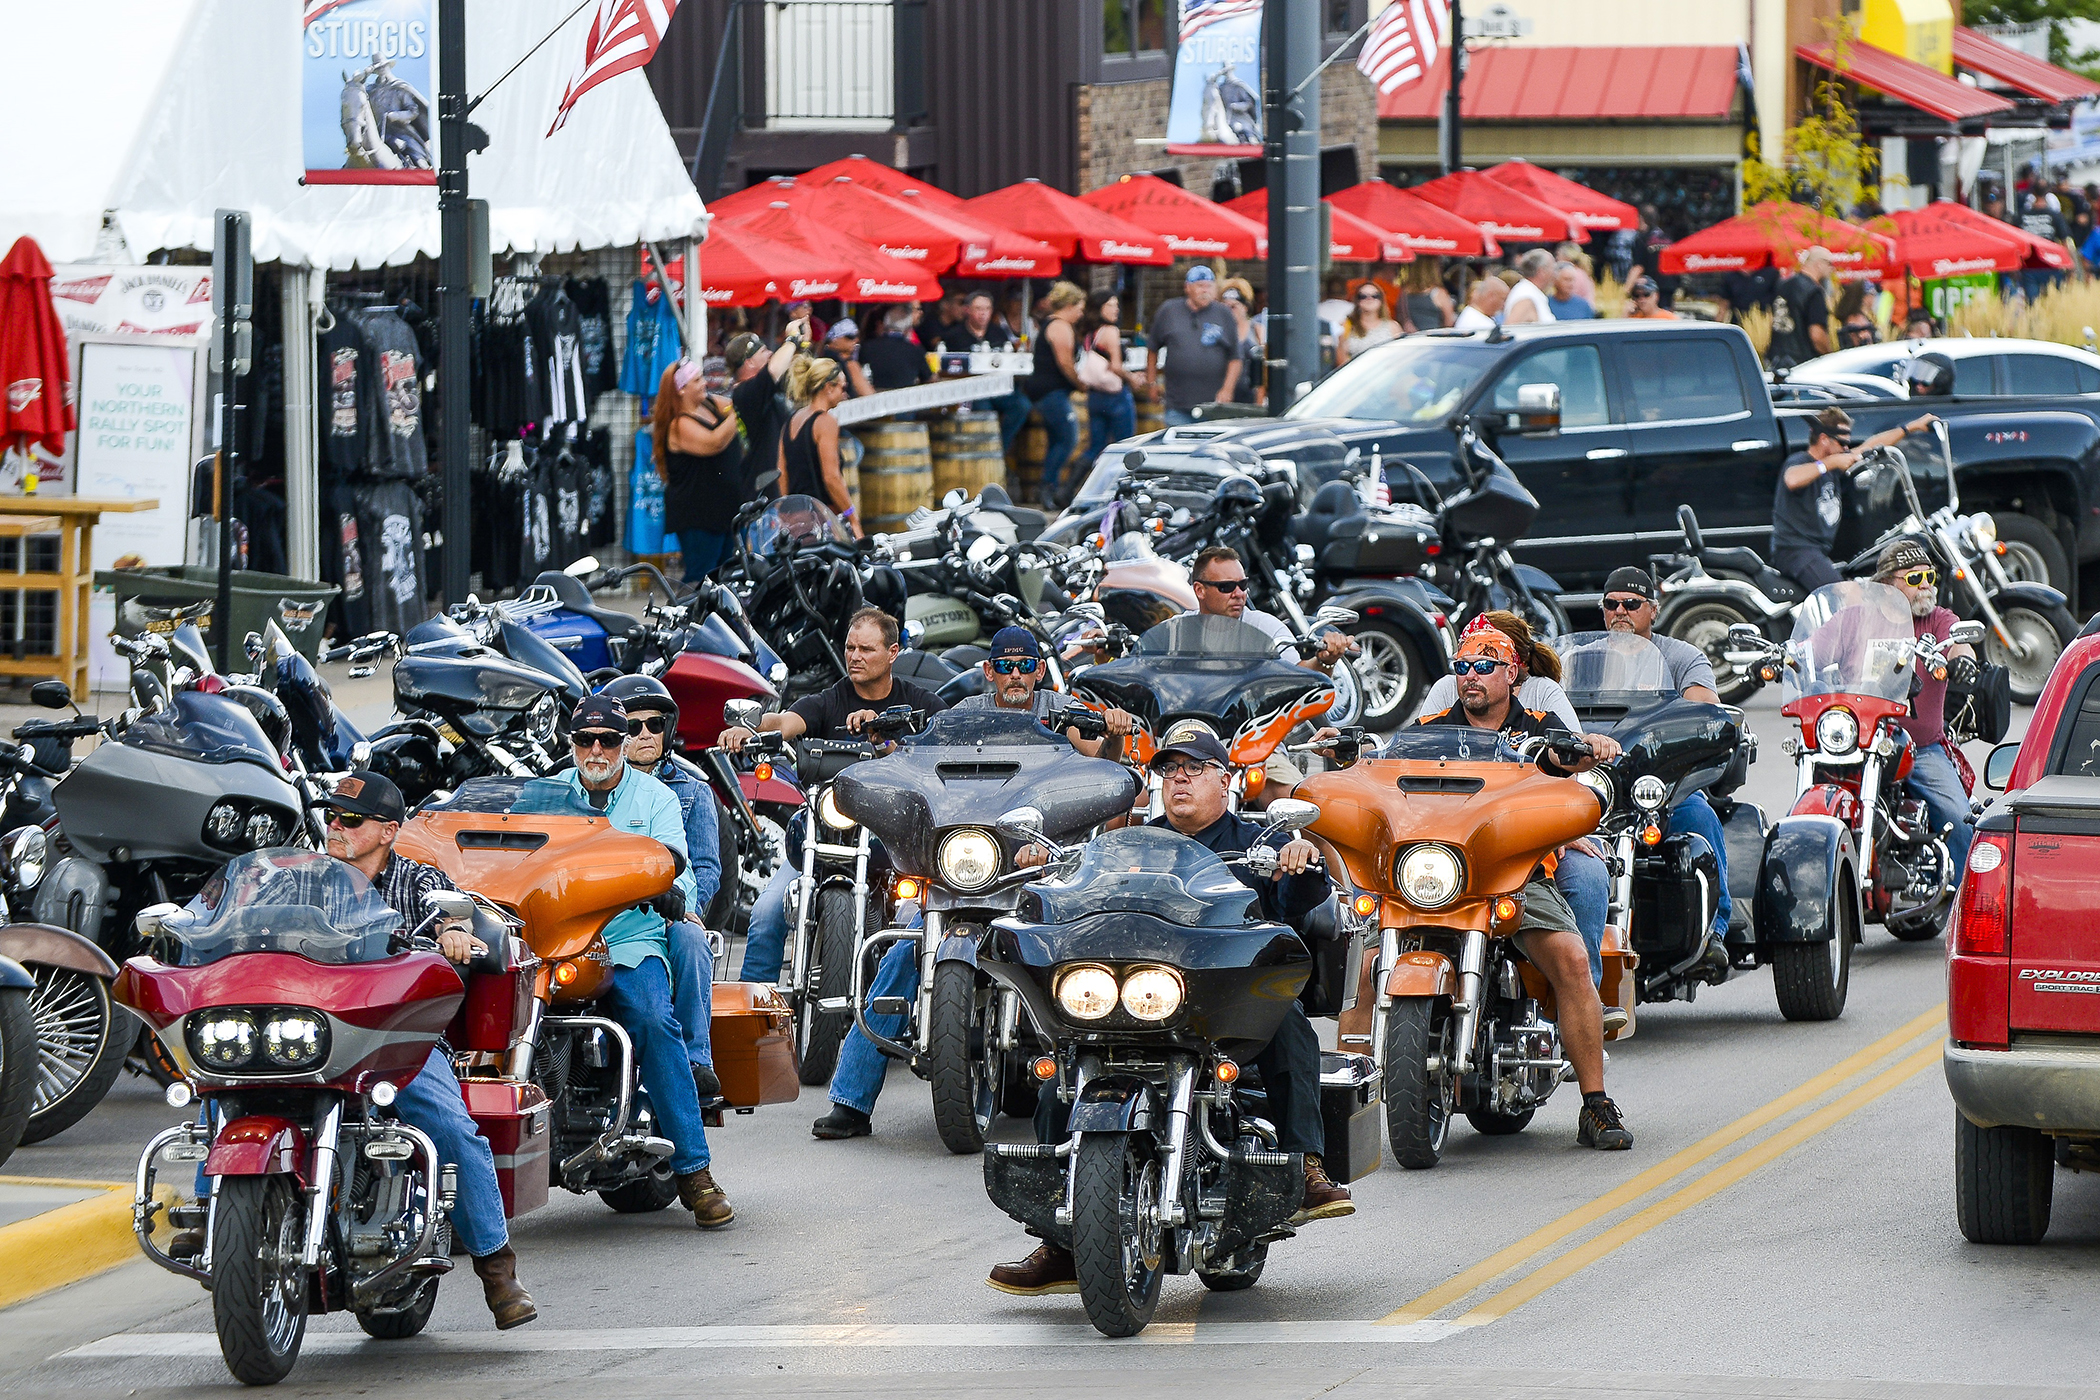 PHOTO: Motorcyclists ride down Main Street a day before the start of the Sturgis Motorcycle Rally in Sturgis, S.D., Aug. 6, 2020.